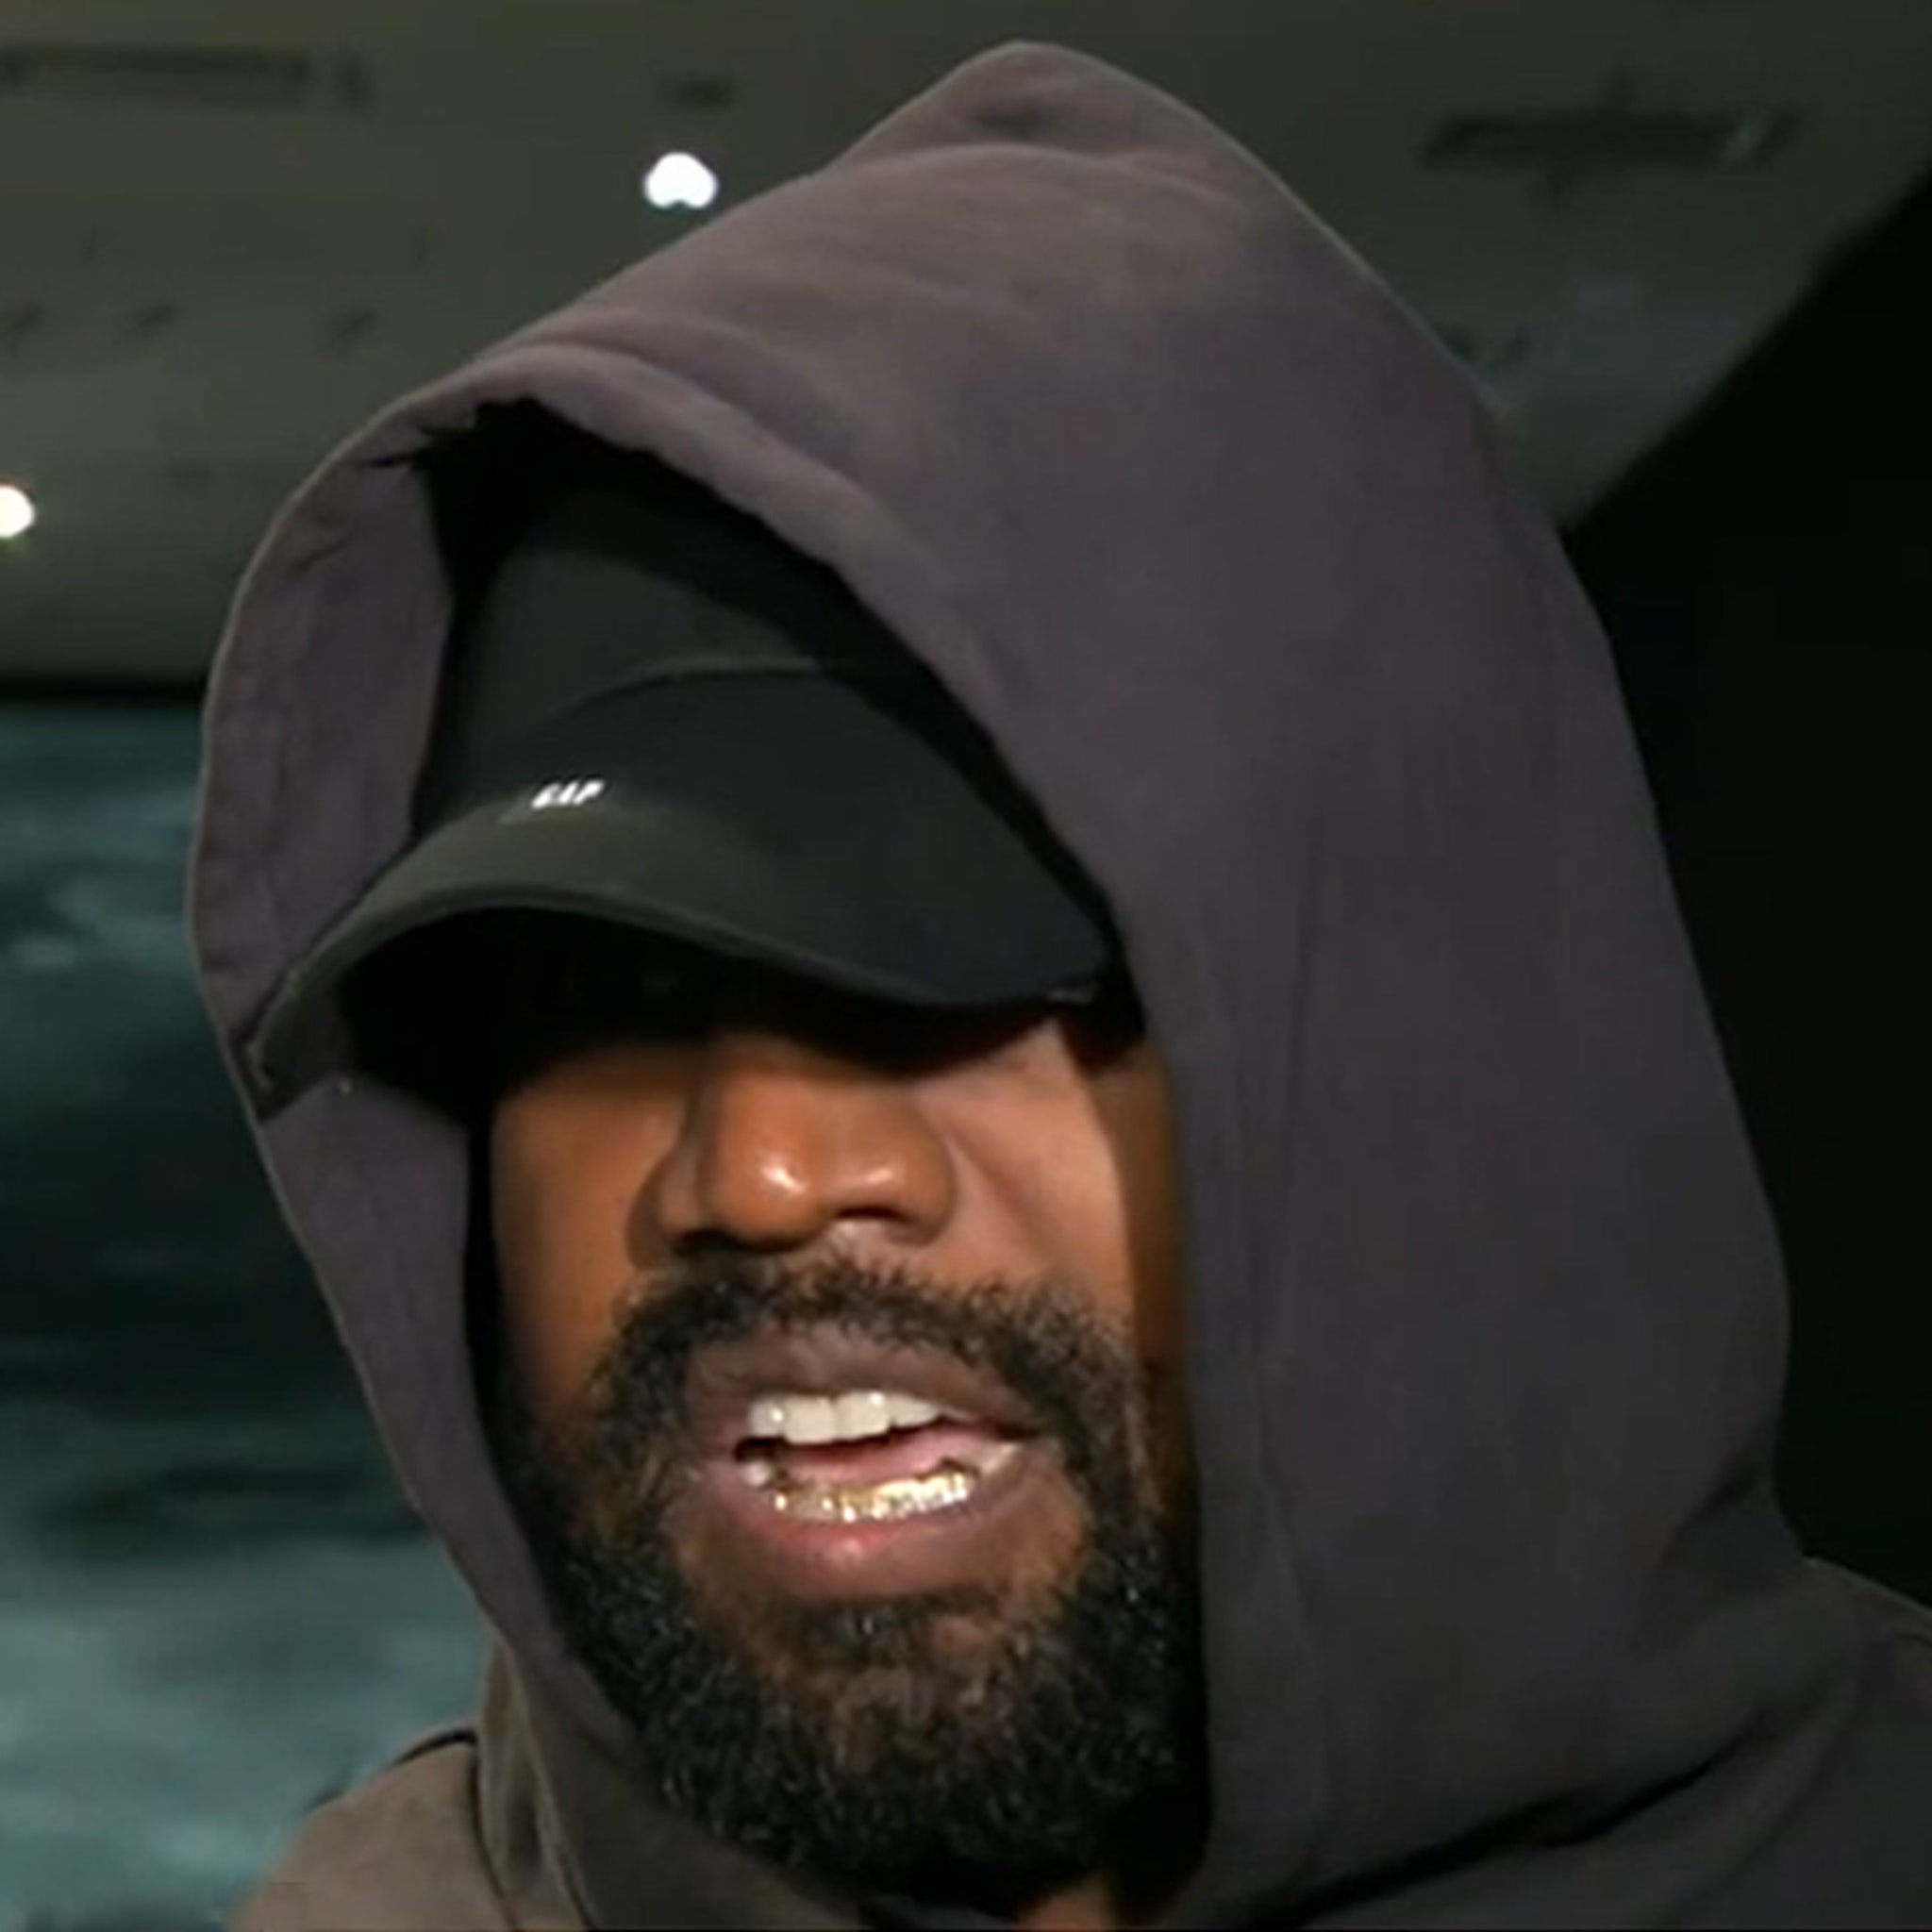 Kanye West Sporting Garbage Bag Fashions in NYC : r/midjourney